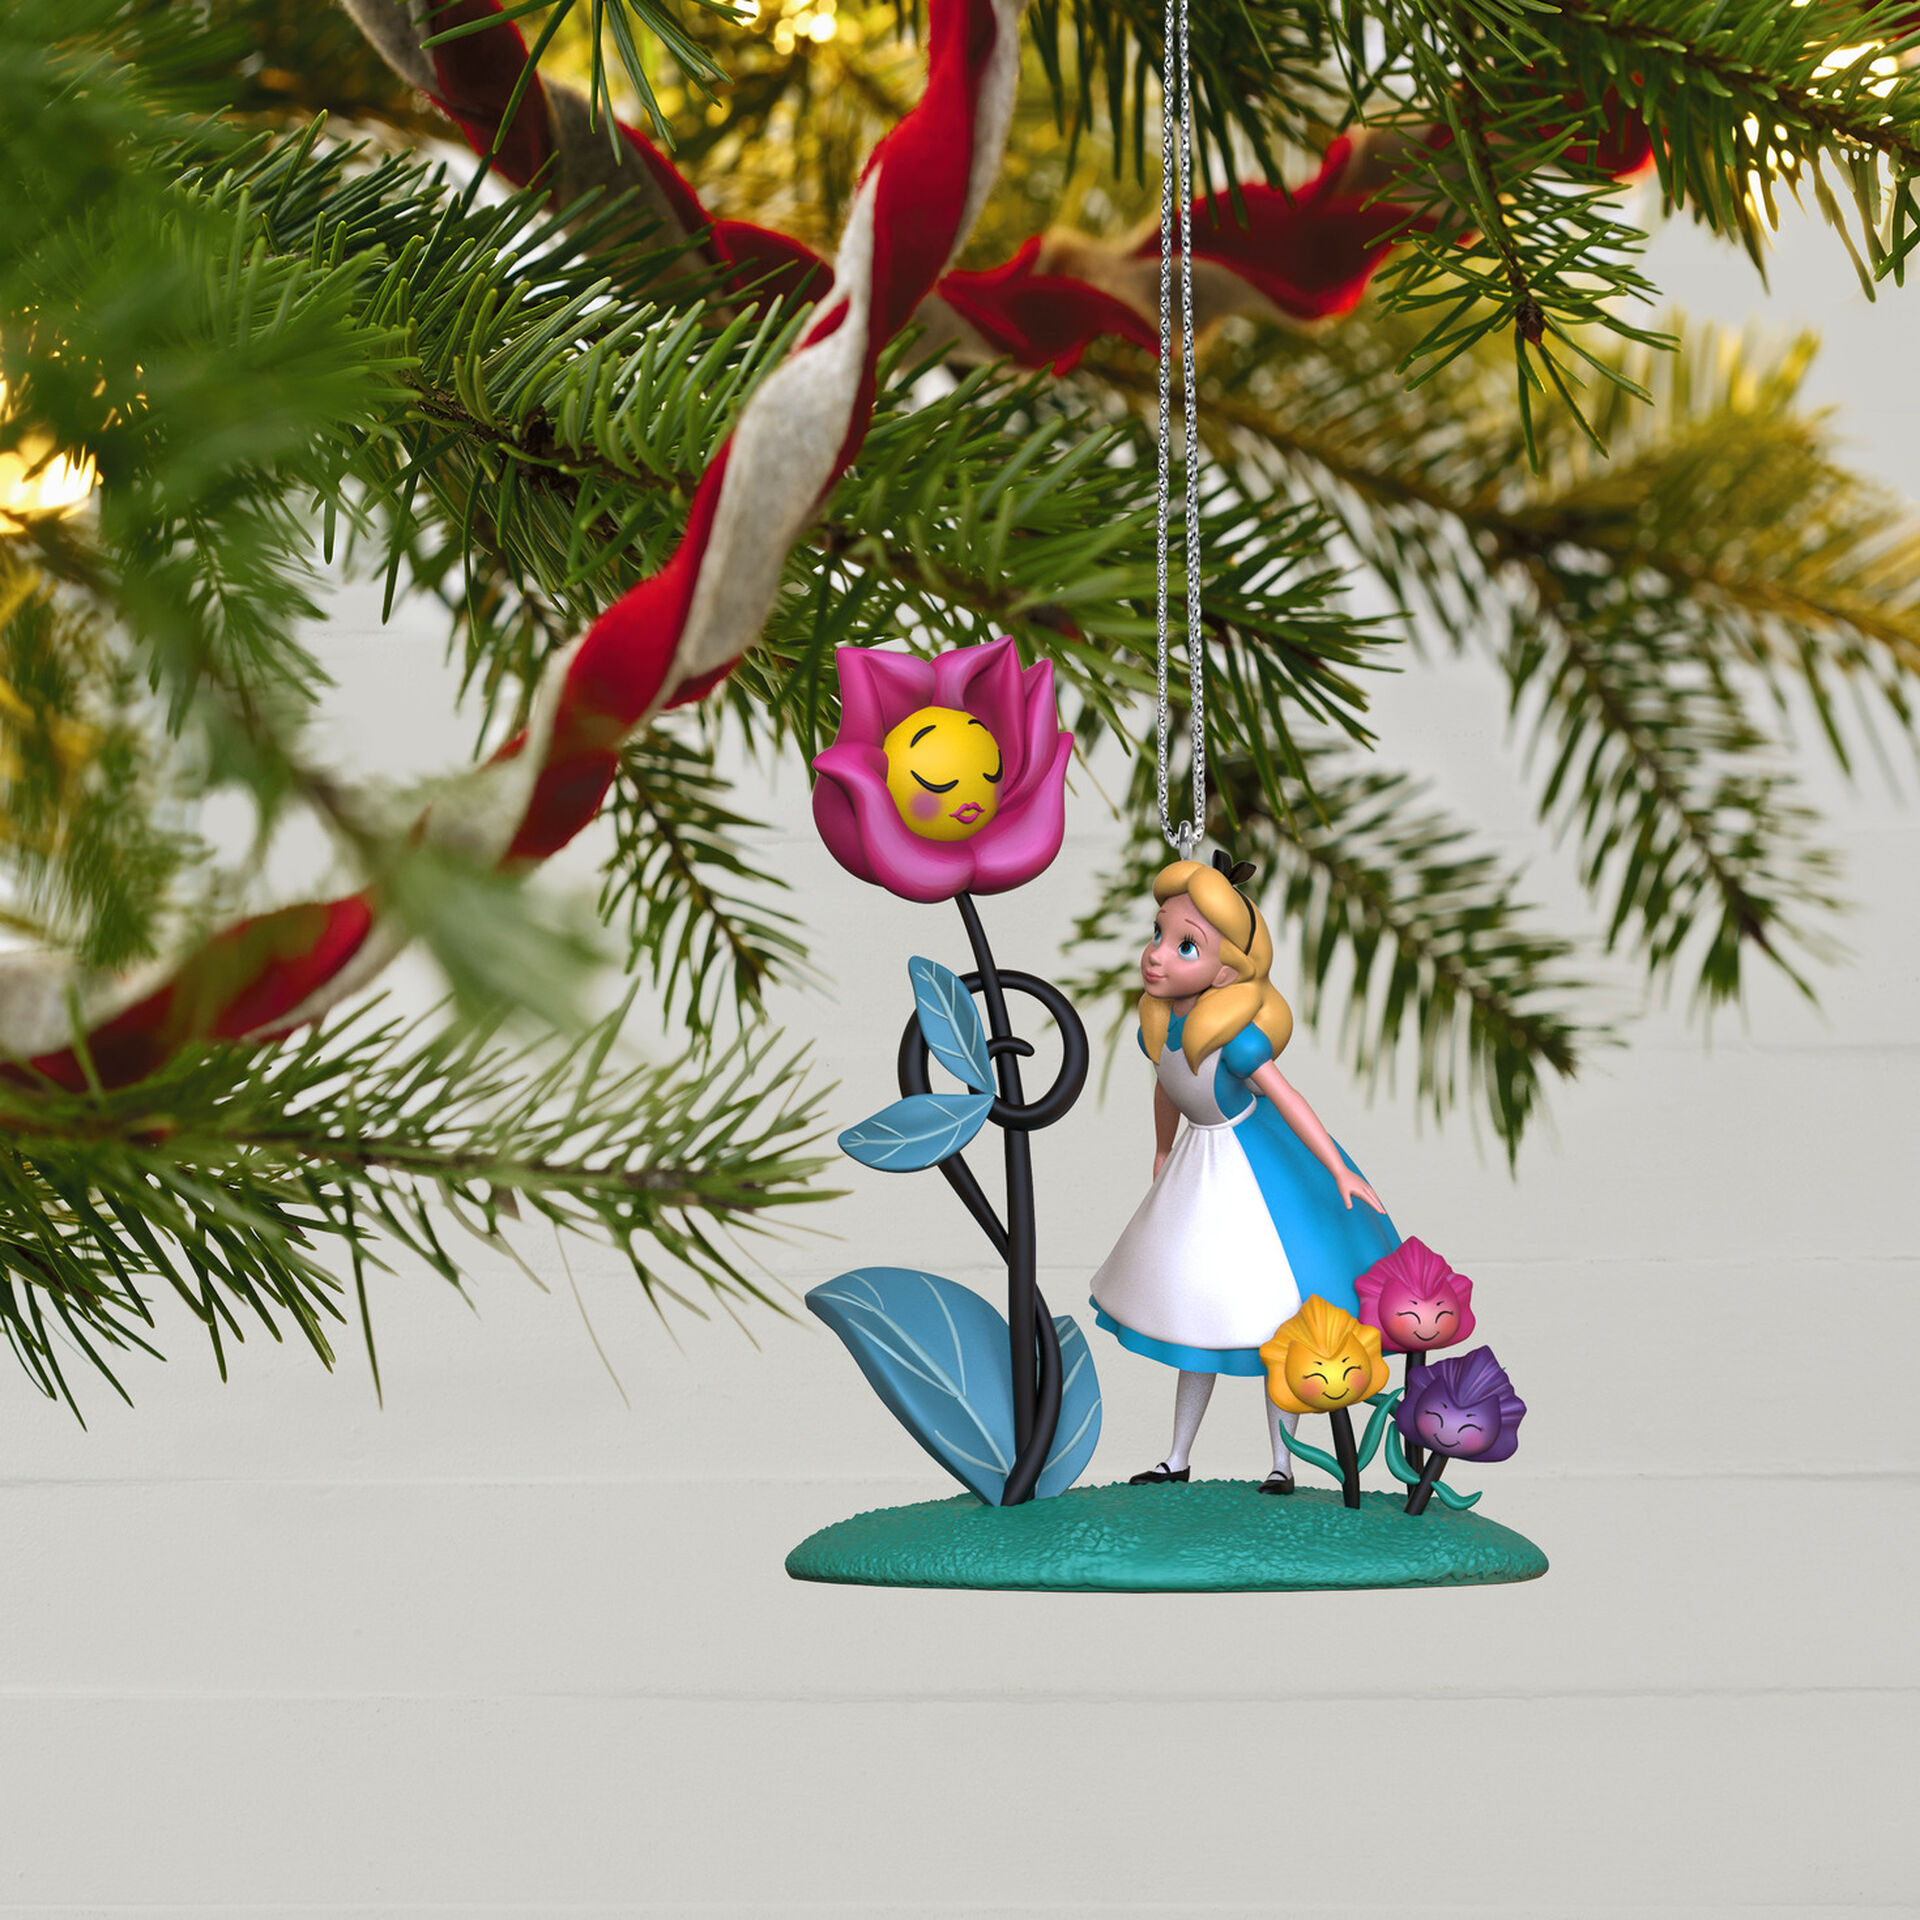 Disney Alice in Wonderland 70th Anniversary Ornament 2021 - Occasions  Hallmark Gifts and More